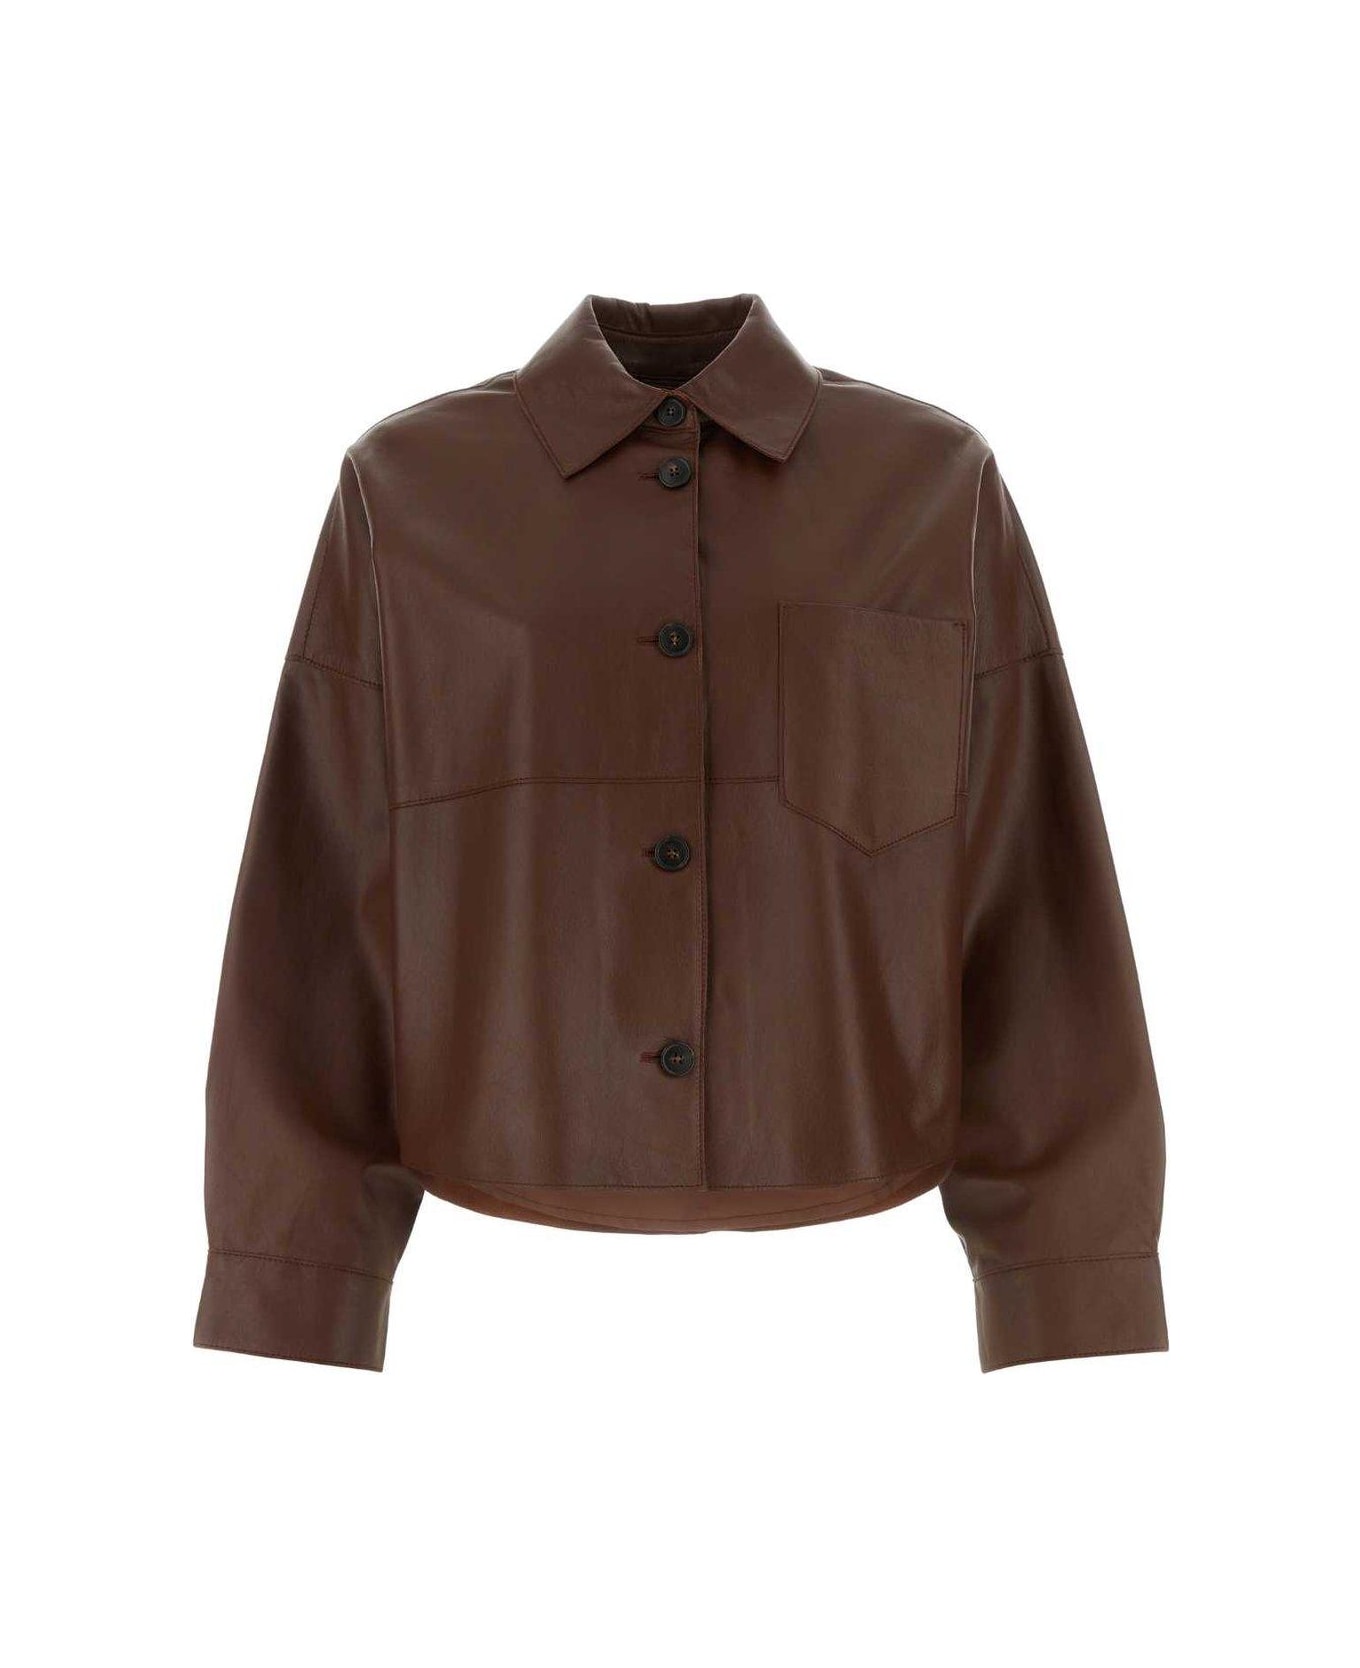 Weekend Max Mara Leather Jacket With Buttons - Marrone